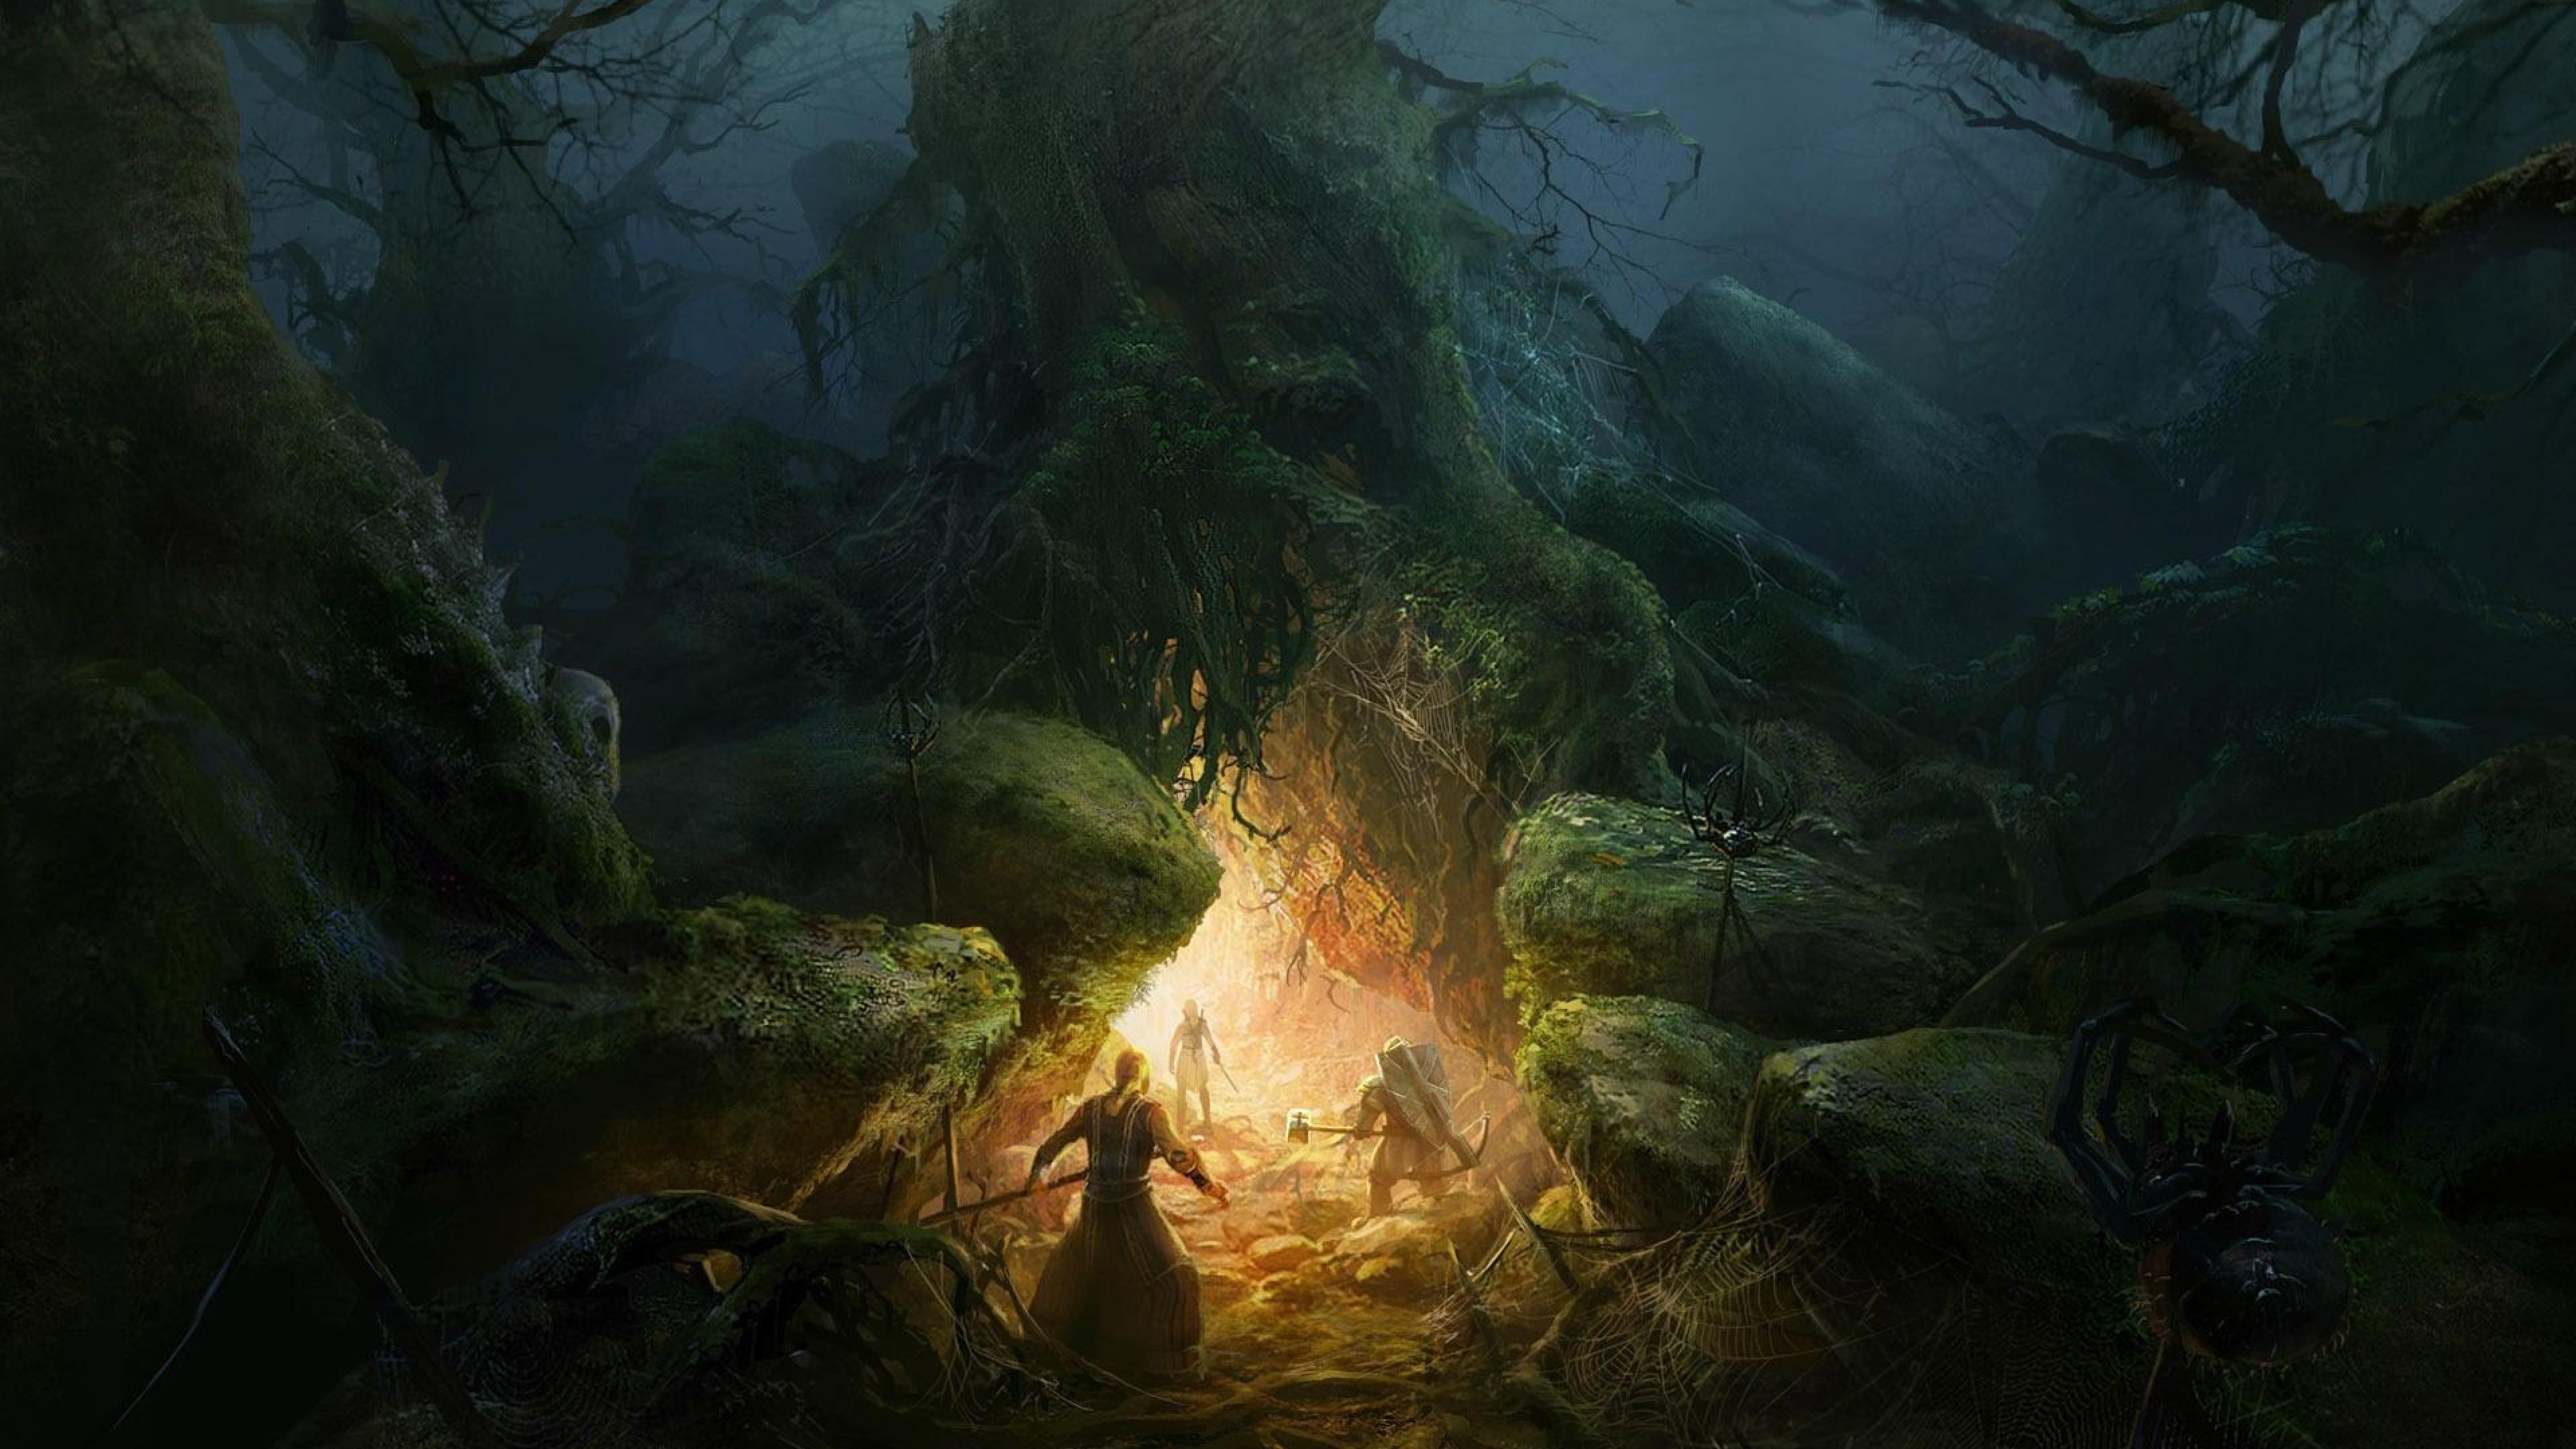 wizard, Fantasy art, Forest, Mist, The Lord of the Rings Wallpaper